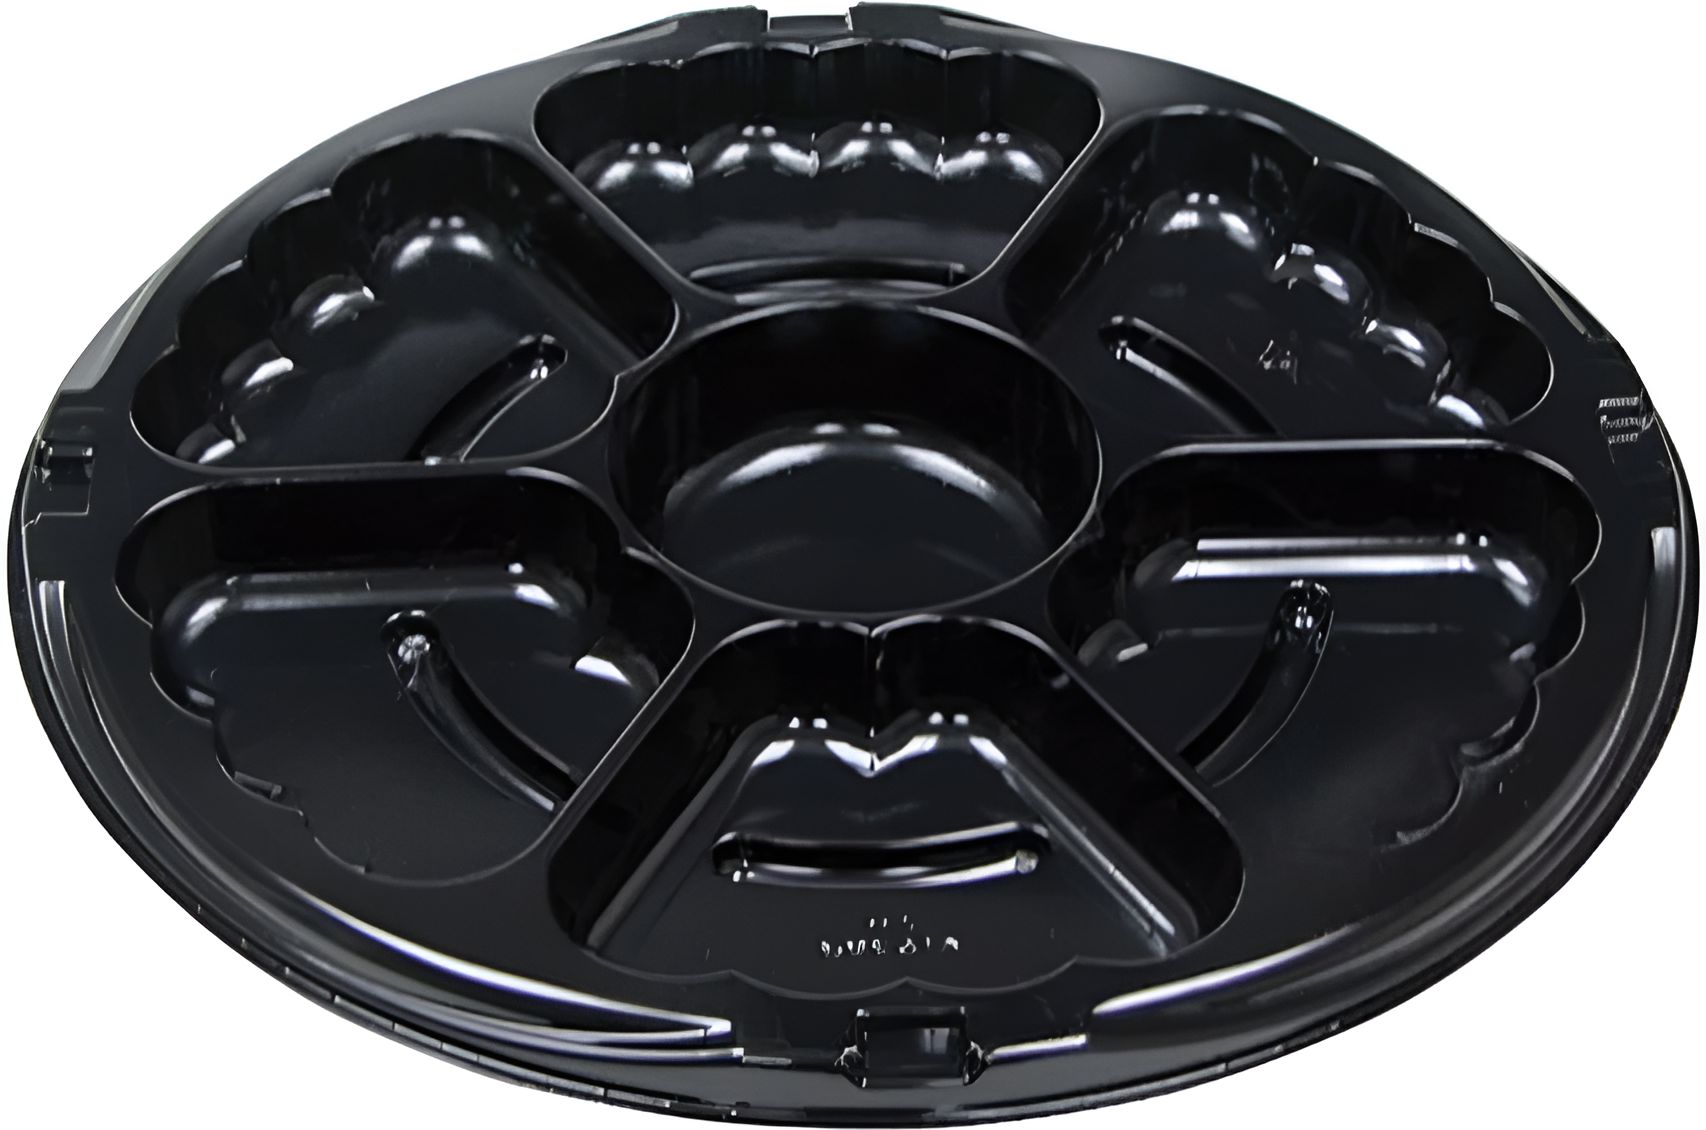 Pactiv Evergreen - 12" Black Round 7-Compartment Catering Tray, 50/Cs - 9912K